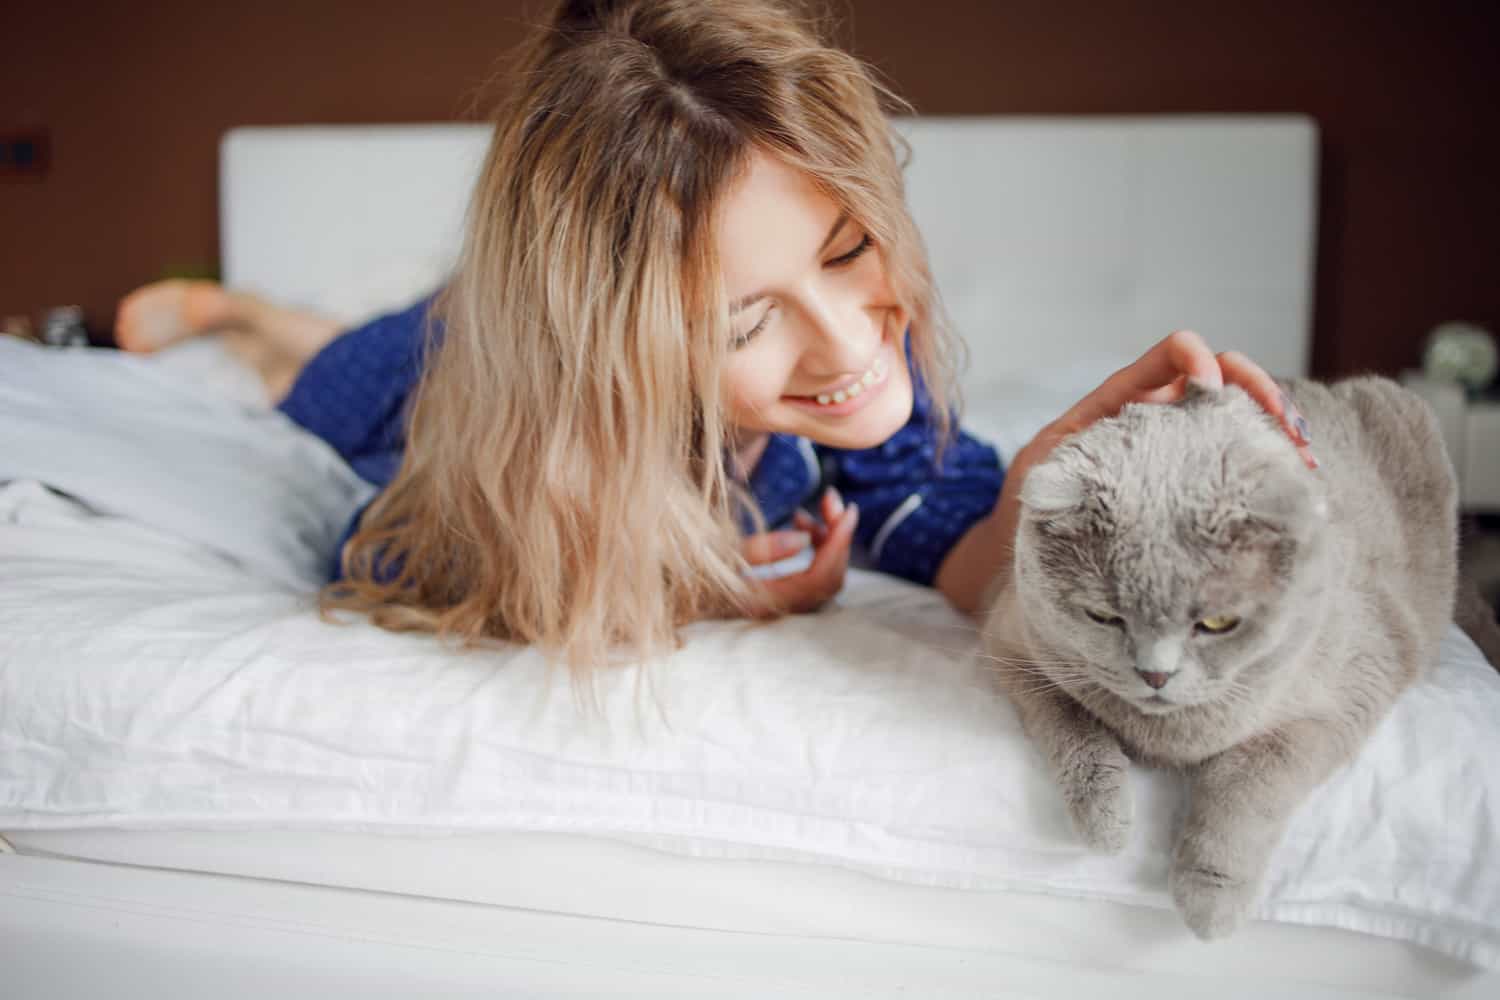 A woman laying on a bed smiling and petting a grey cat